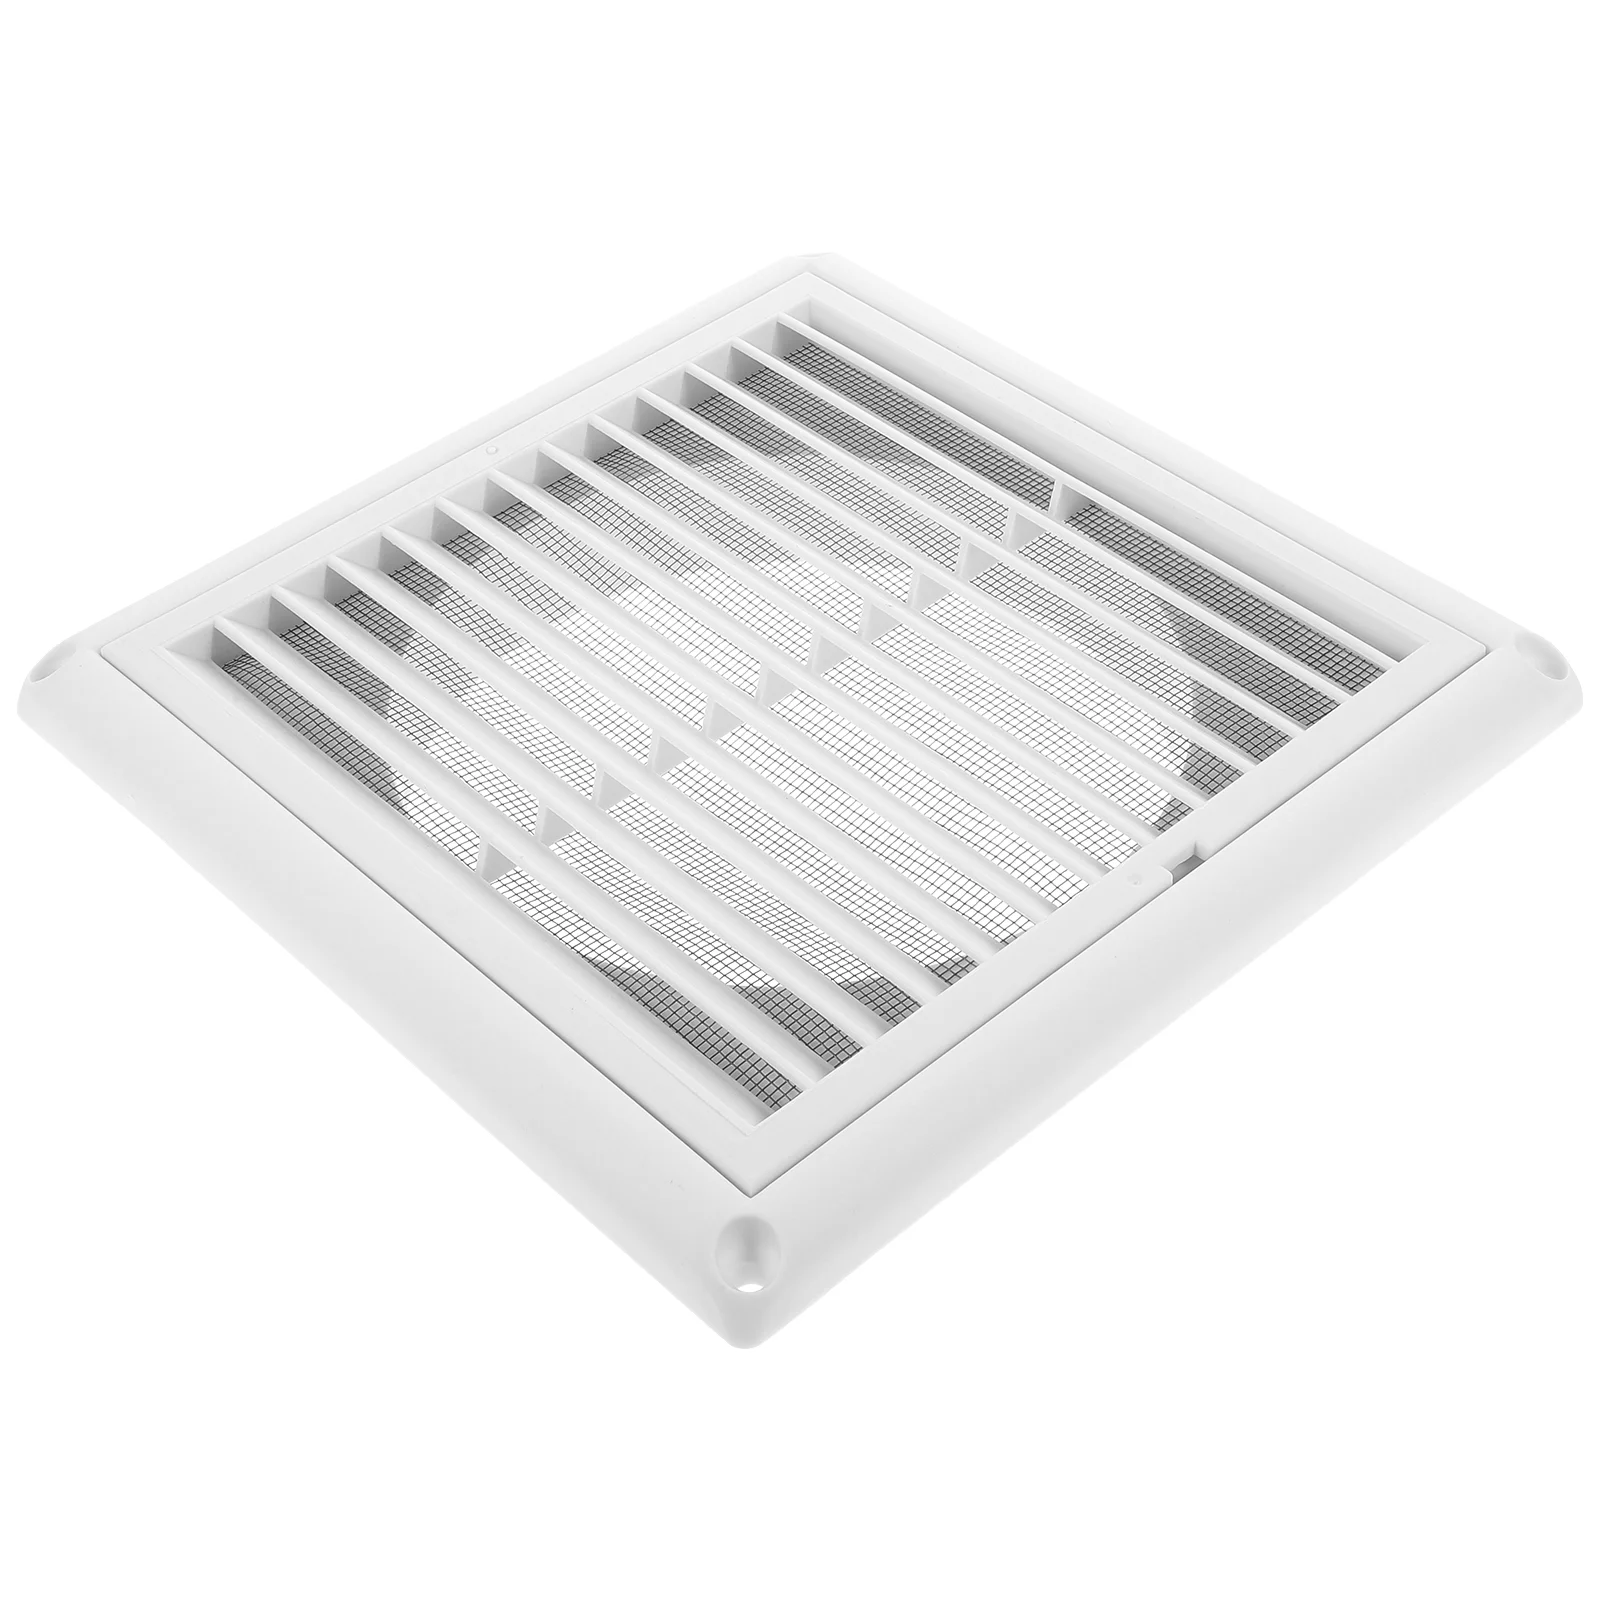 

Air Conditioner Return Air Conditioning Vent Covers Ventilation Grille Wall Ceiling Floor Exhaust Vent